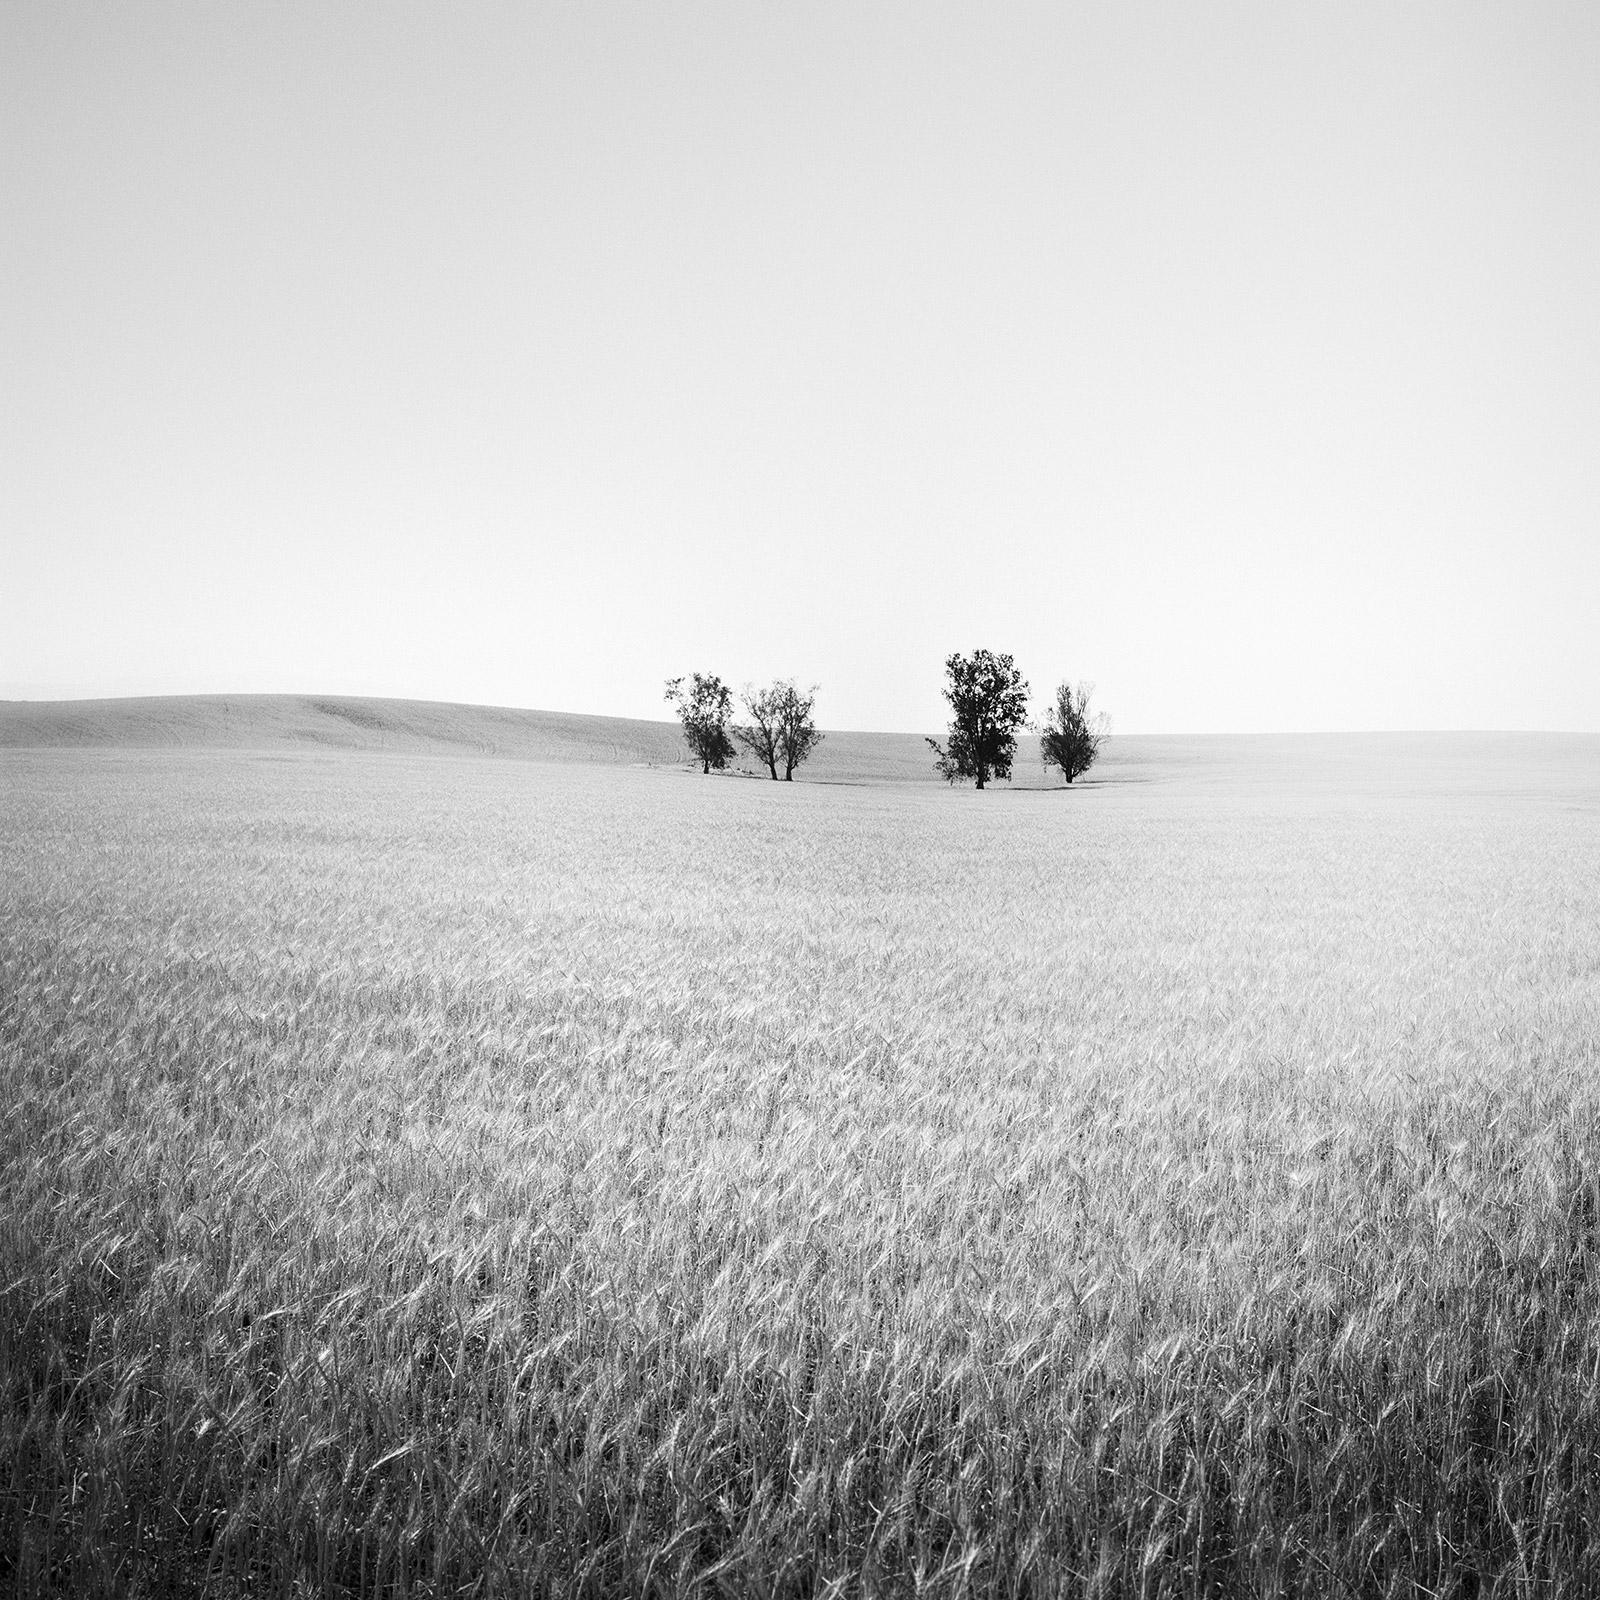 Gerald Berghammer Landscape Photograph - Trees in wheat field, California, USA, black and white art landscape photography